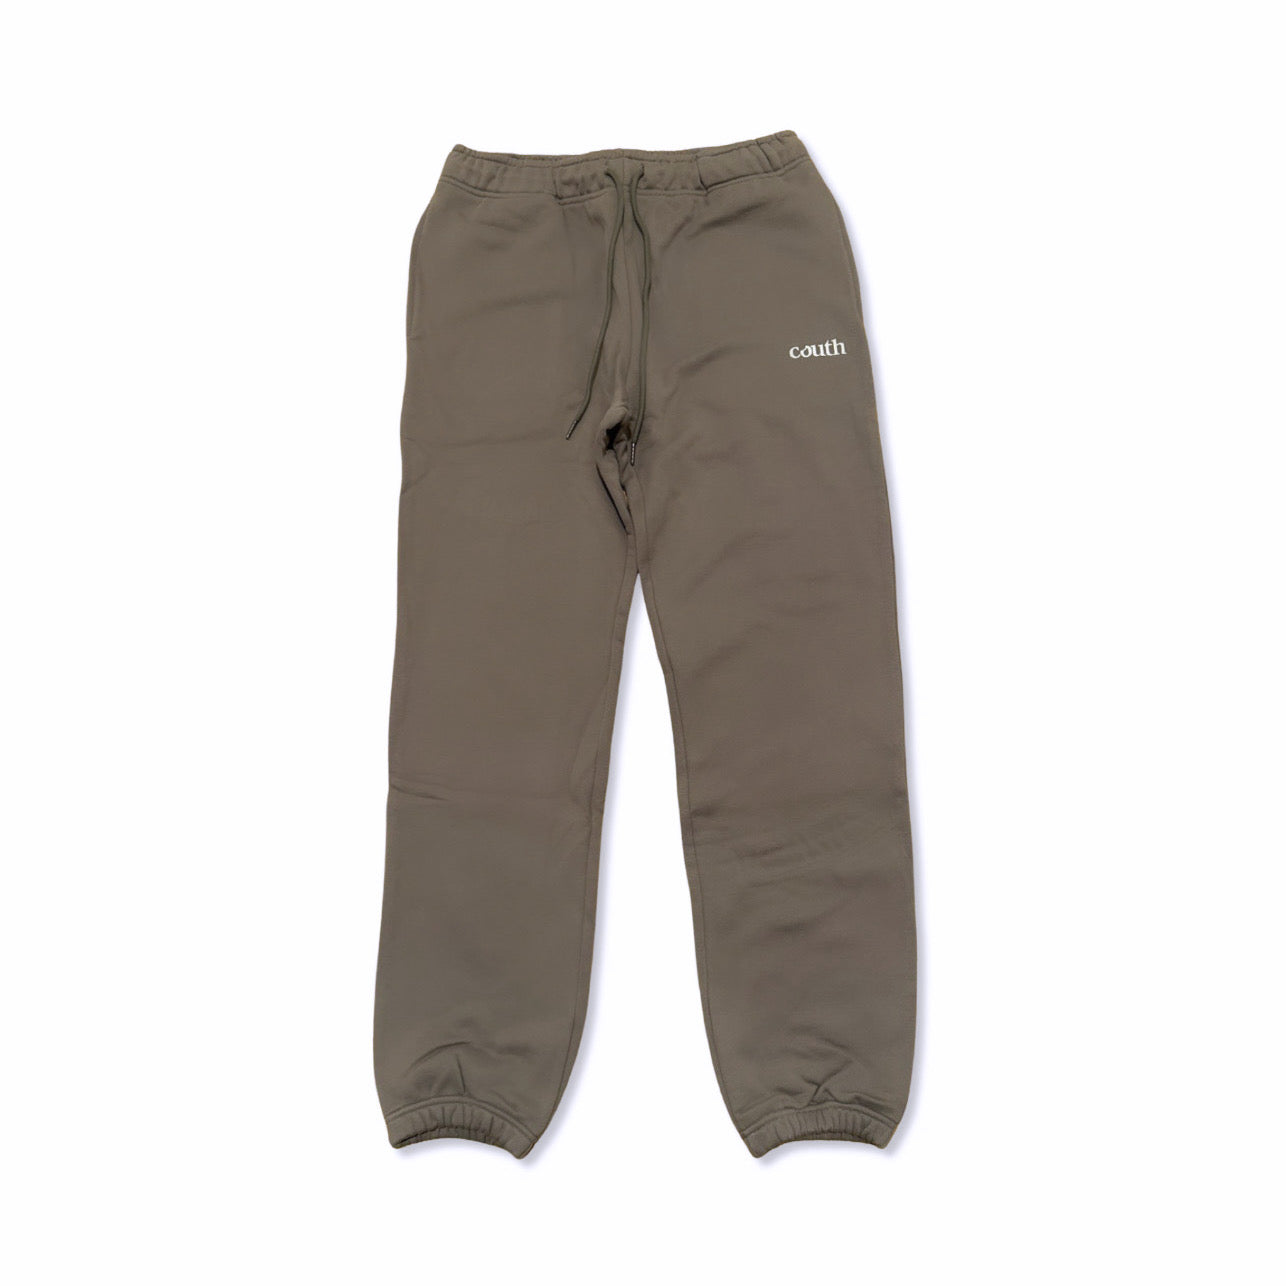 Couth Essential Sweatpant (Moonrock)